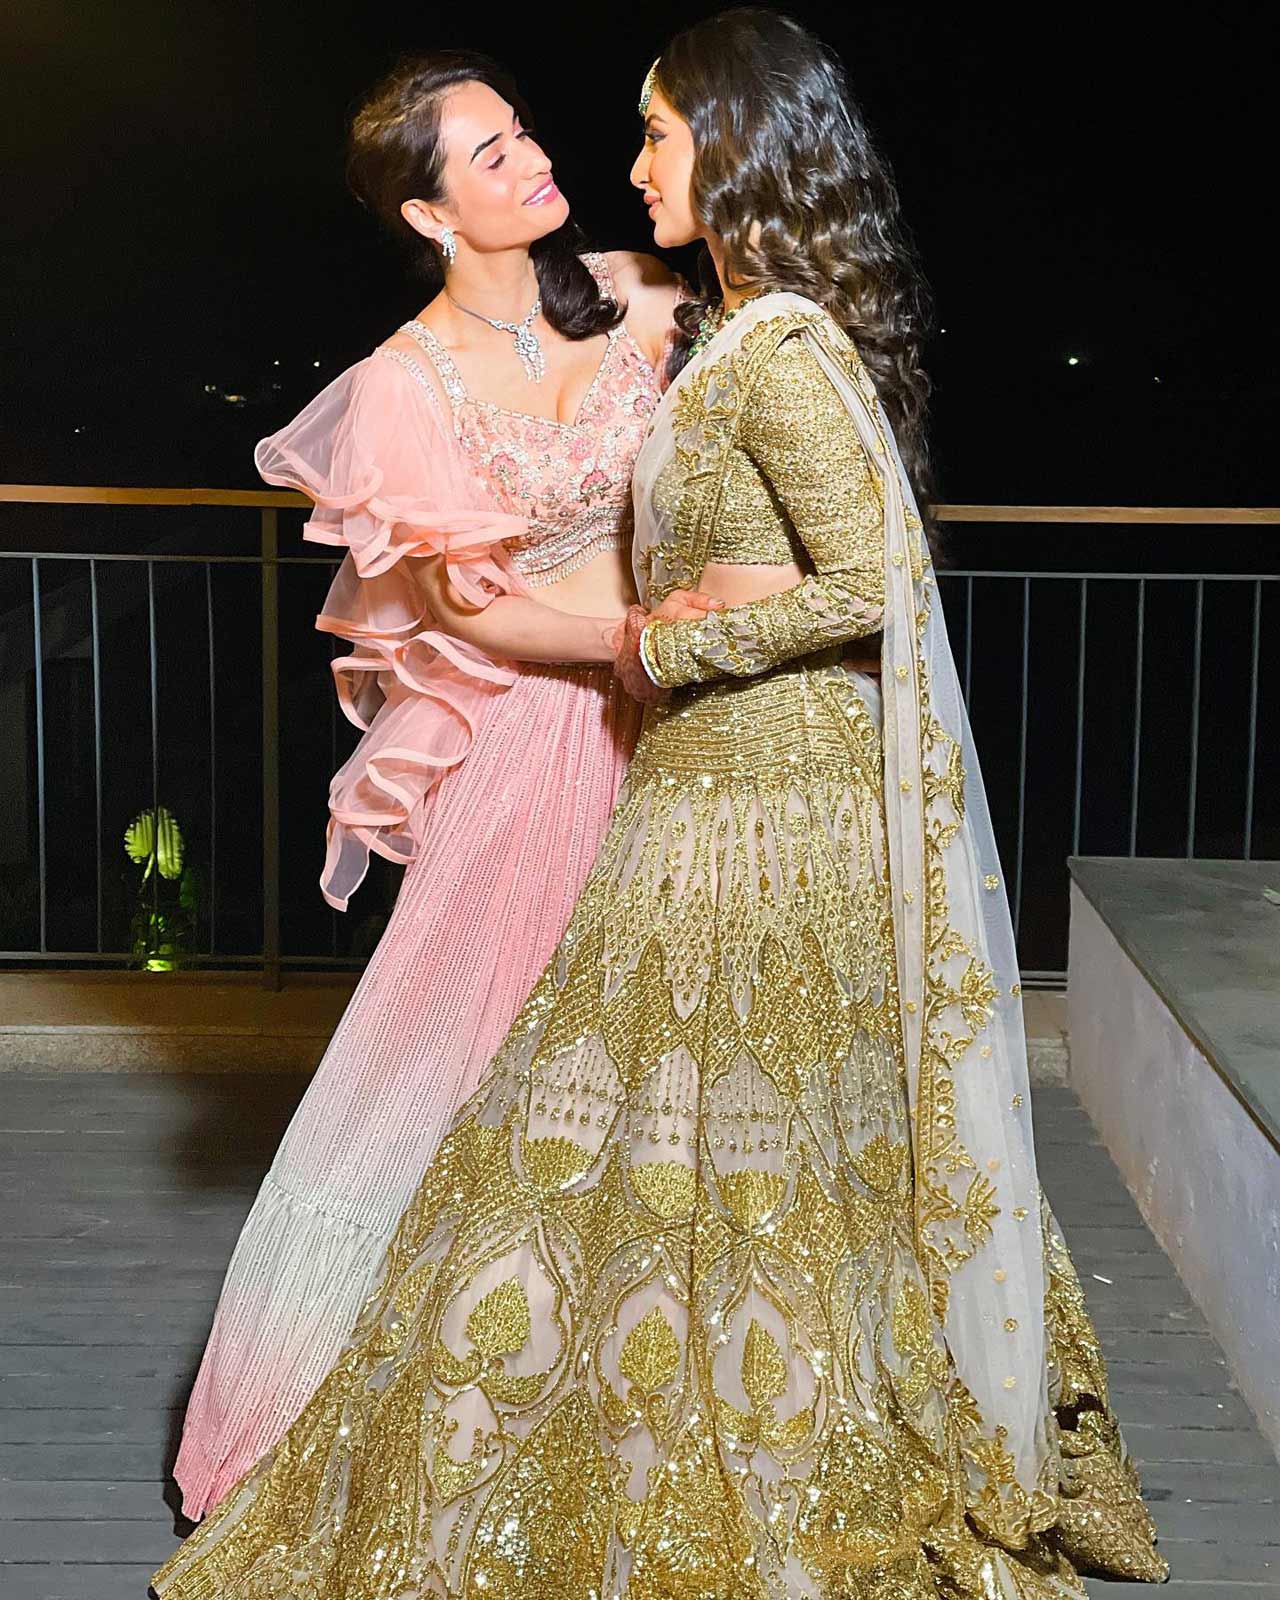 For their shimmery Sangeet night, the bride wore a heavy golden lehenga with emerald jewellery. Suraj looked dapper in a royal blue sherwani, as seen in their cake cutting and dance videos on social media.